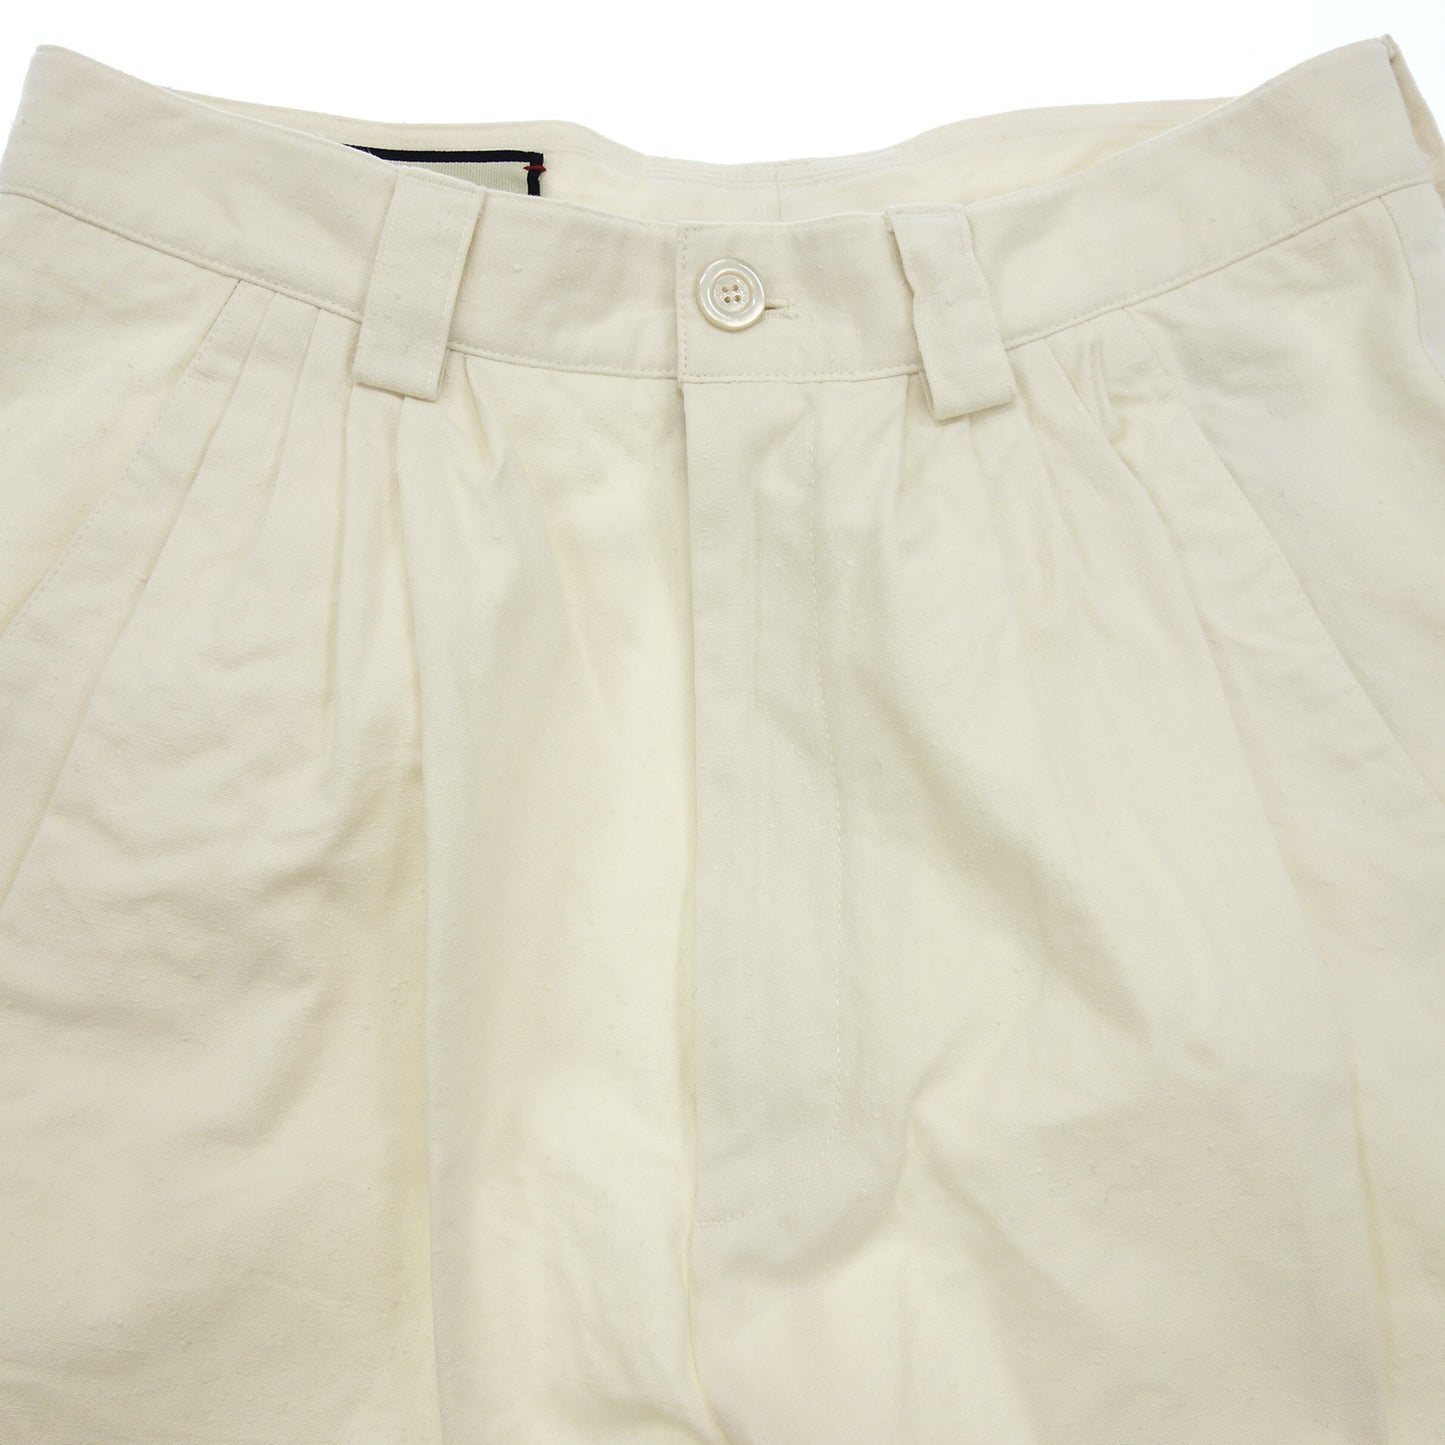 Good condition◆Gucci trousers pants men's white 44 GUCCI [AFB27] 